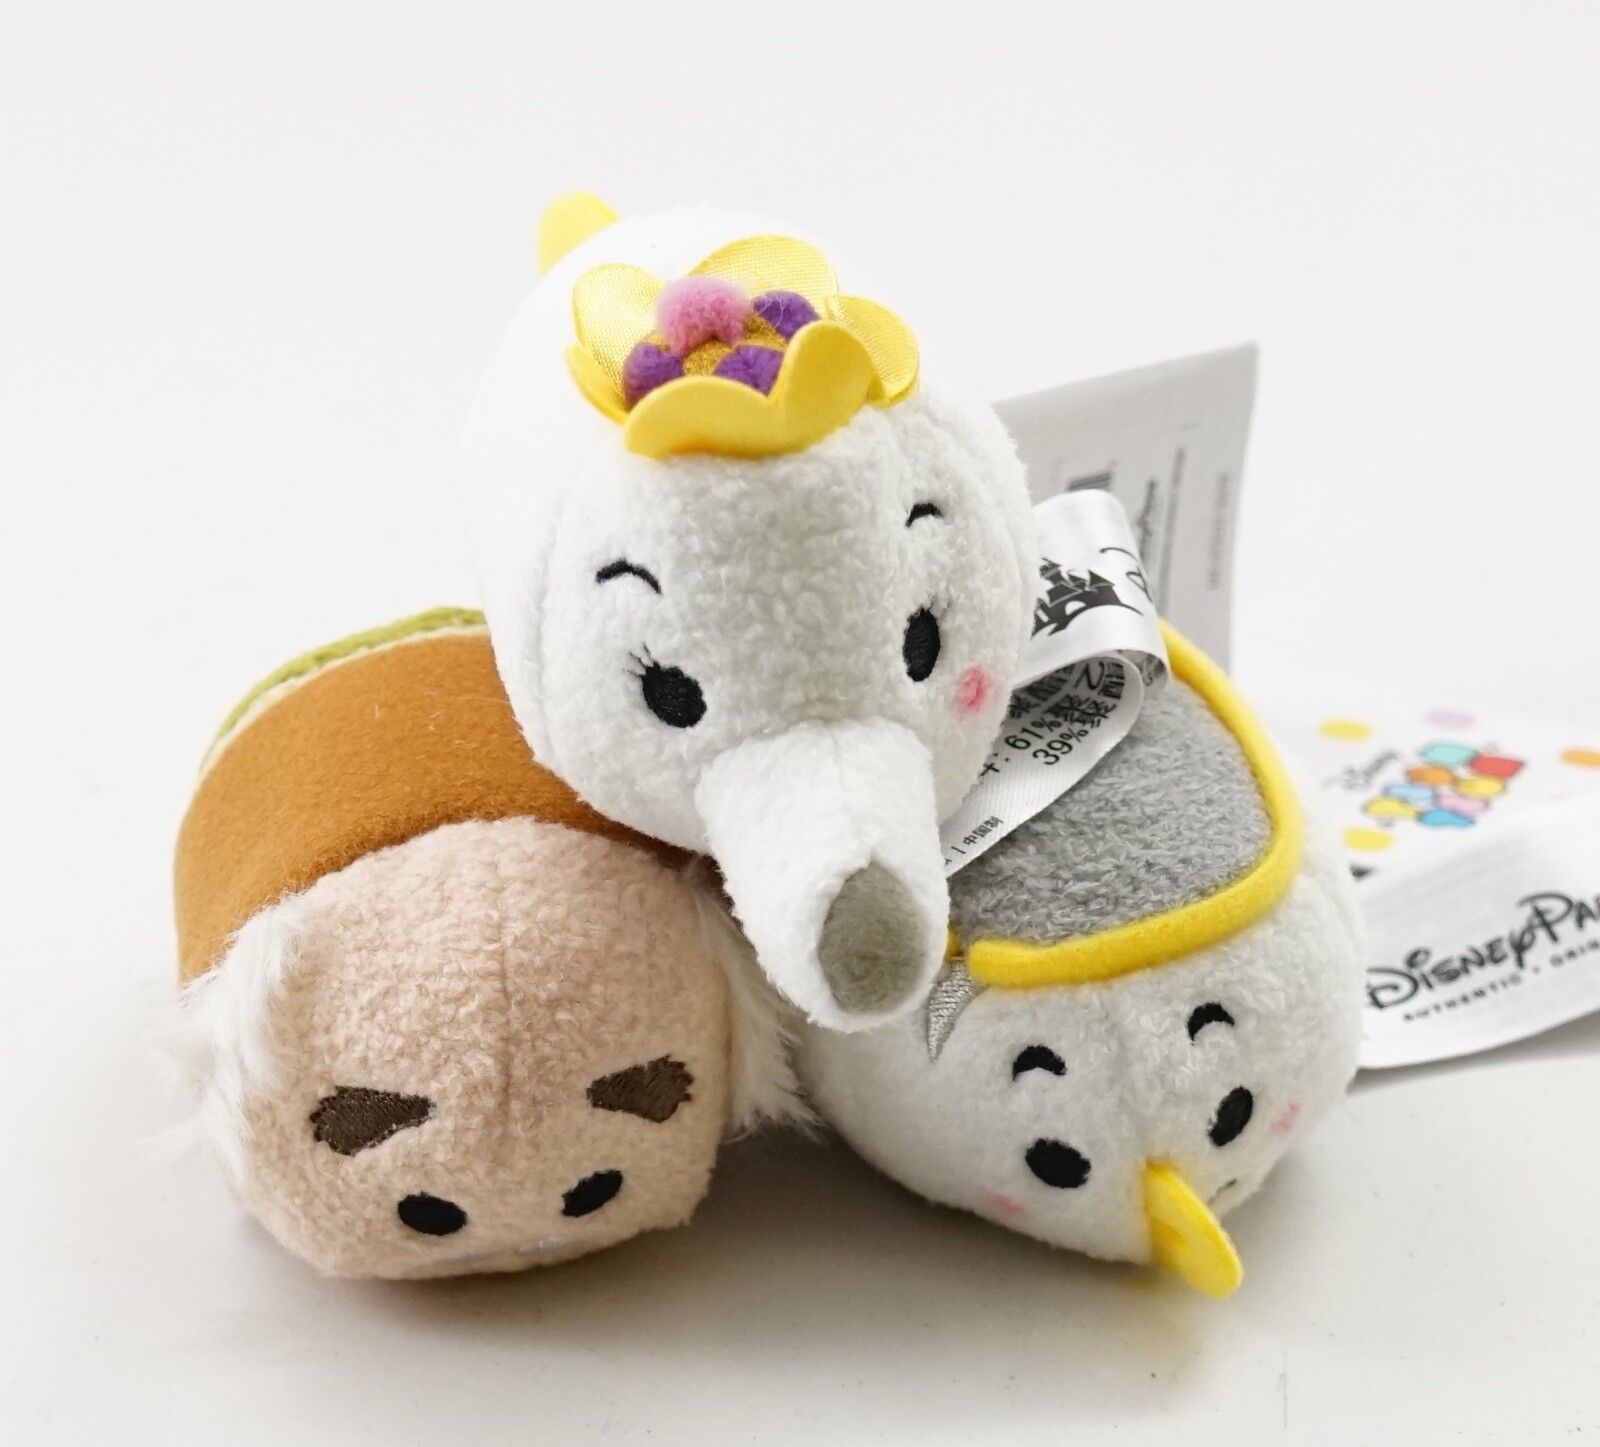 NEW Authentic US Disney Parks Beauty And The Beast Set of 3 Tsum Tsum Mini